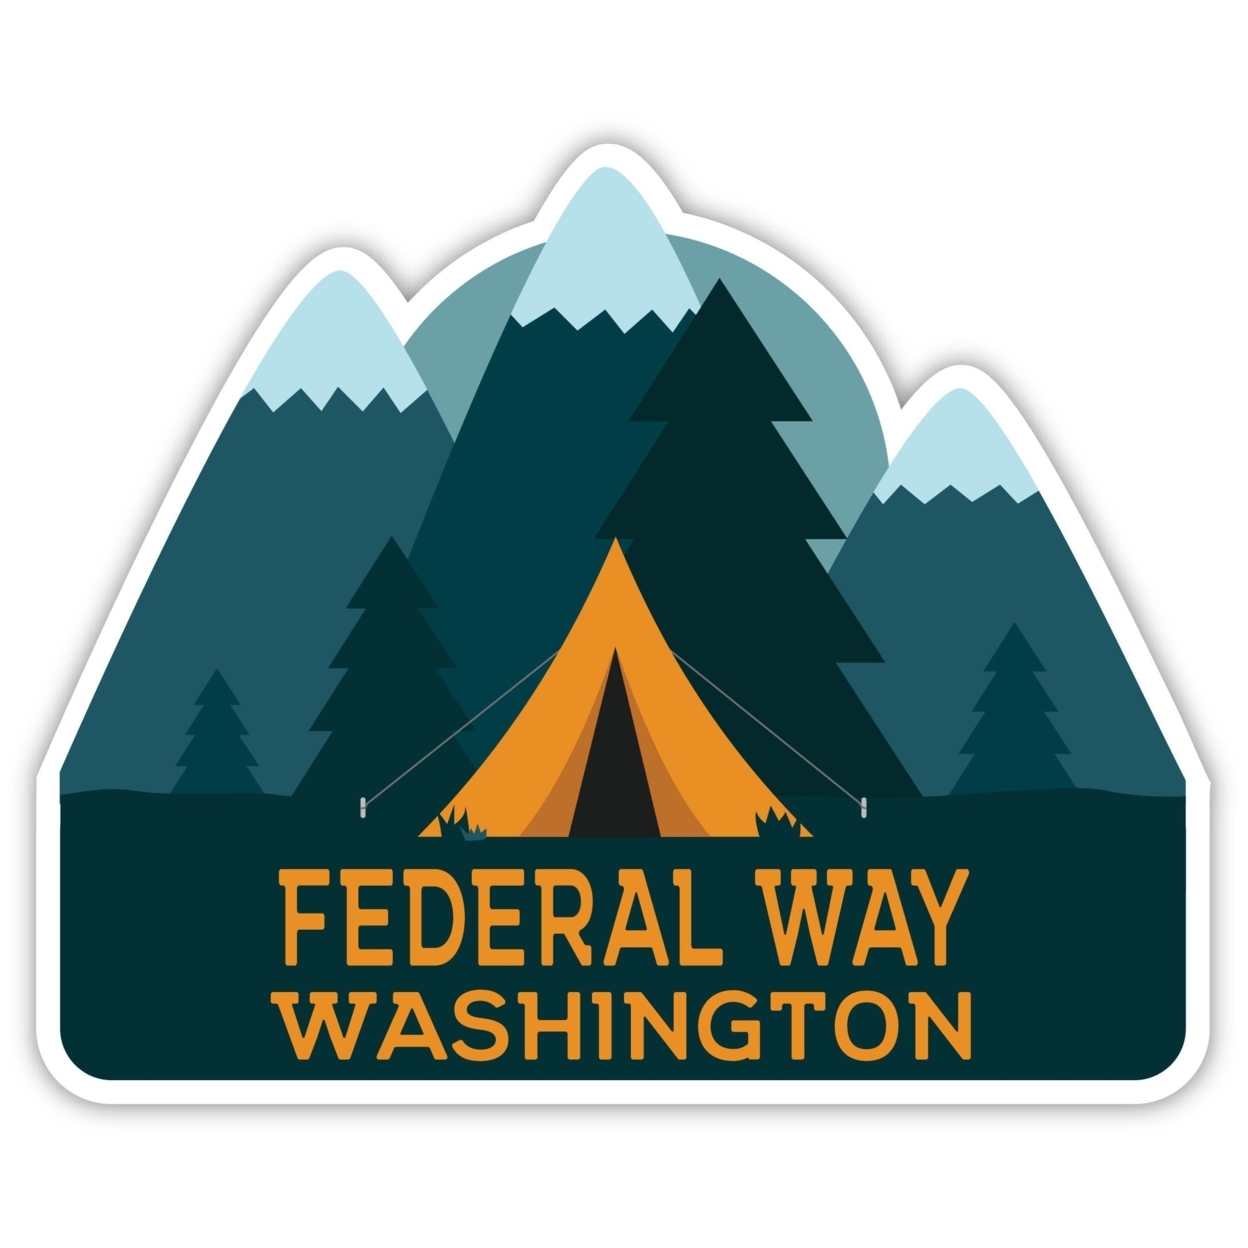 Federal Way Washington Souvenir Decorative Stickers (Choose Theme And Size) - 4-Pack, 10-Inch, Tent